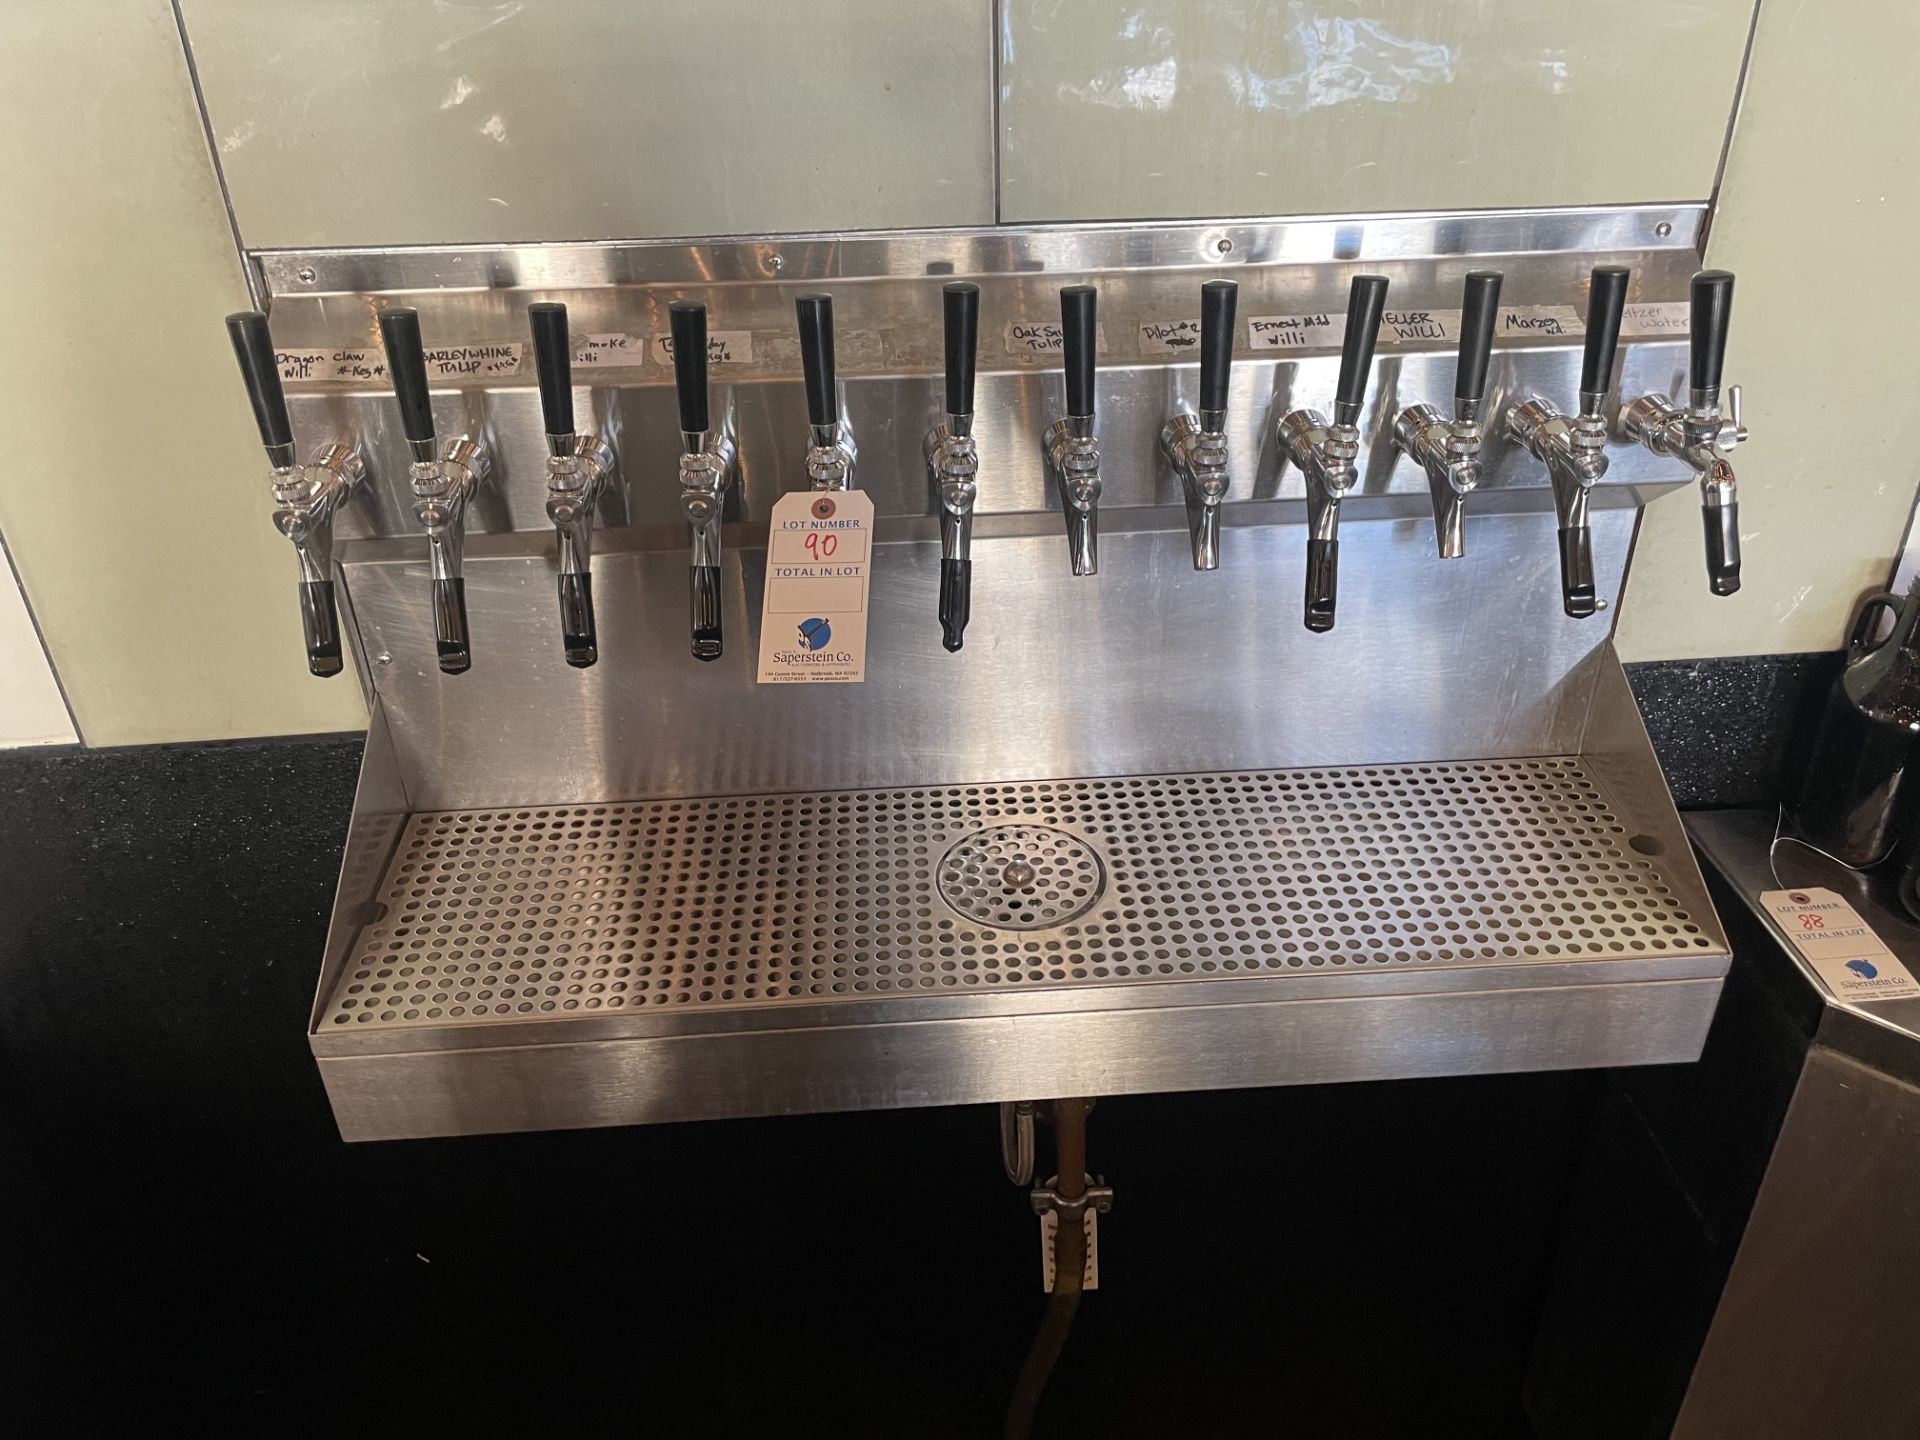 12 Spigot Wall Mounted Beer Tap Dispenser w/Integral Glass Washer, Tap Right Gauges & Manifold